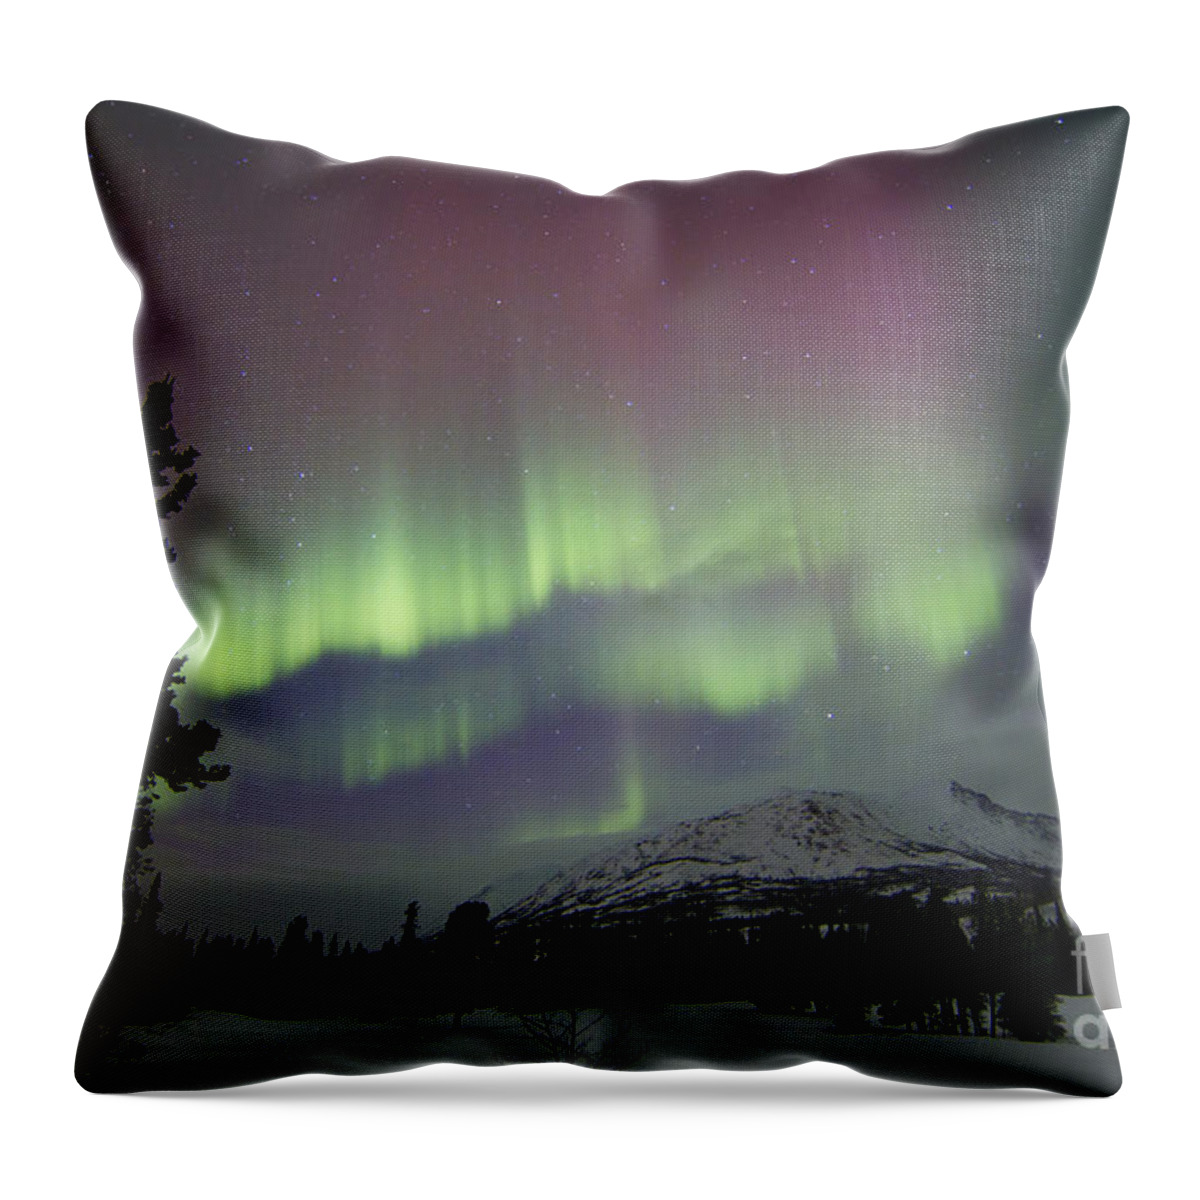 Horizontal Throw Pillow featuring the photograph Red And Green Aurora Borealis by Joseph Bradley